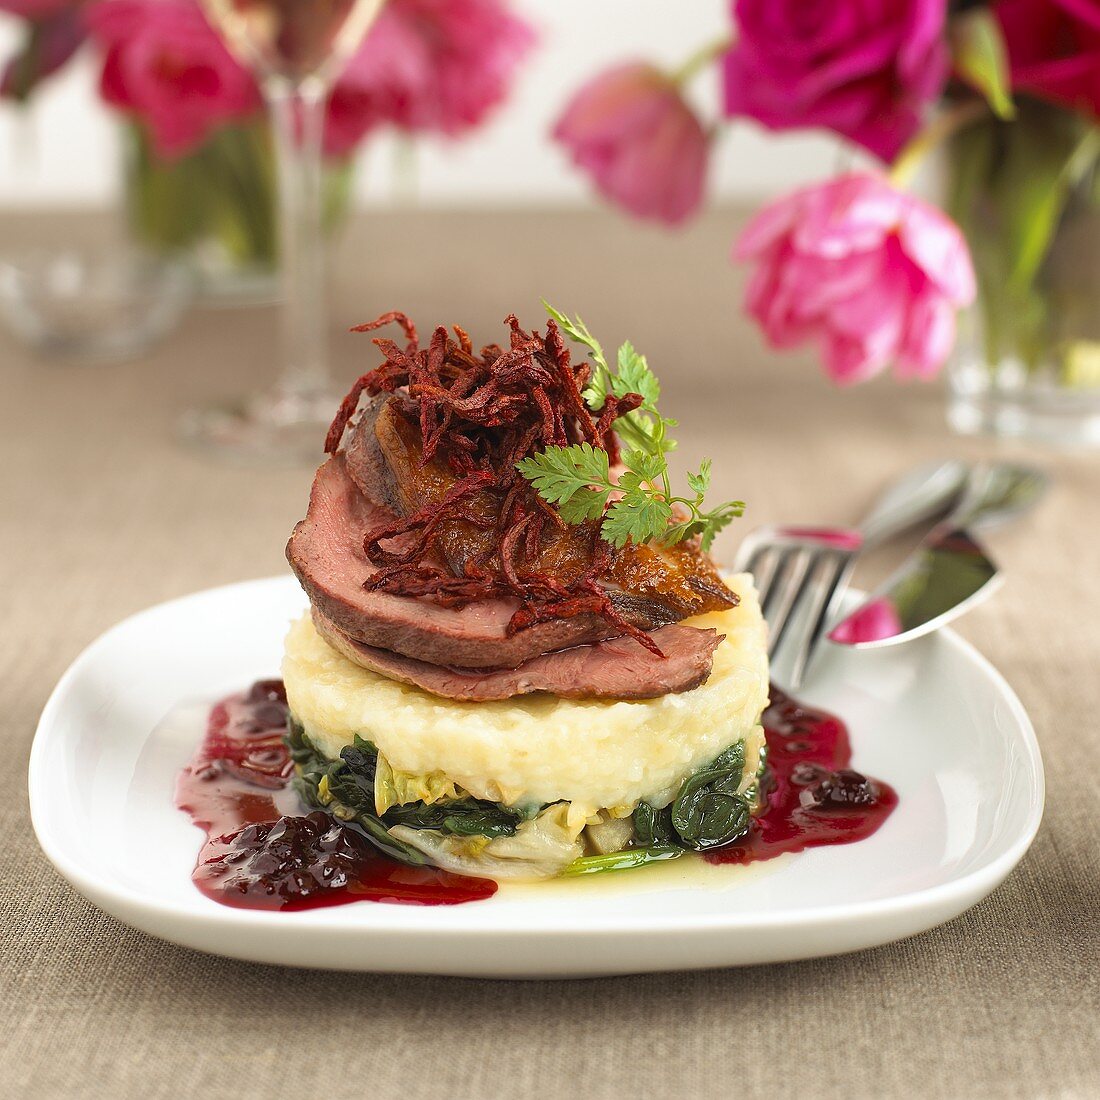 Thin slices of duck on vegetable puree with cranberries